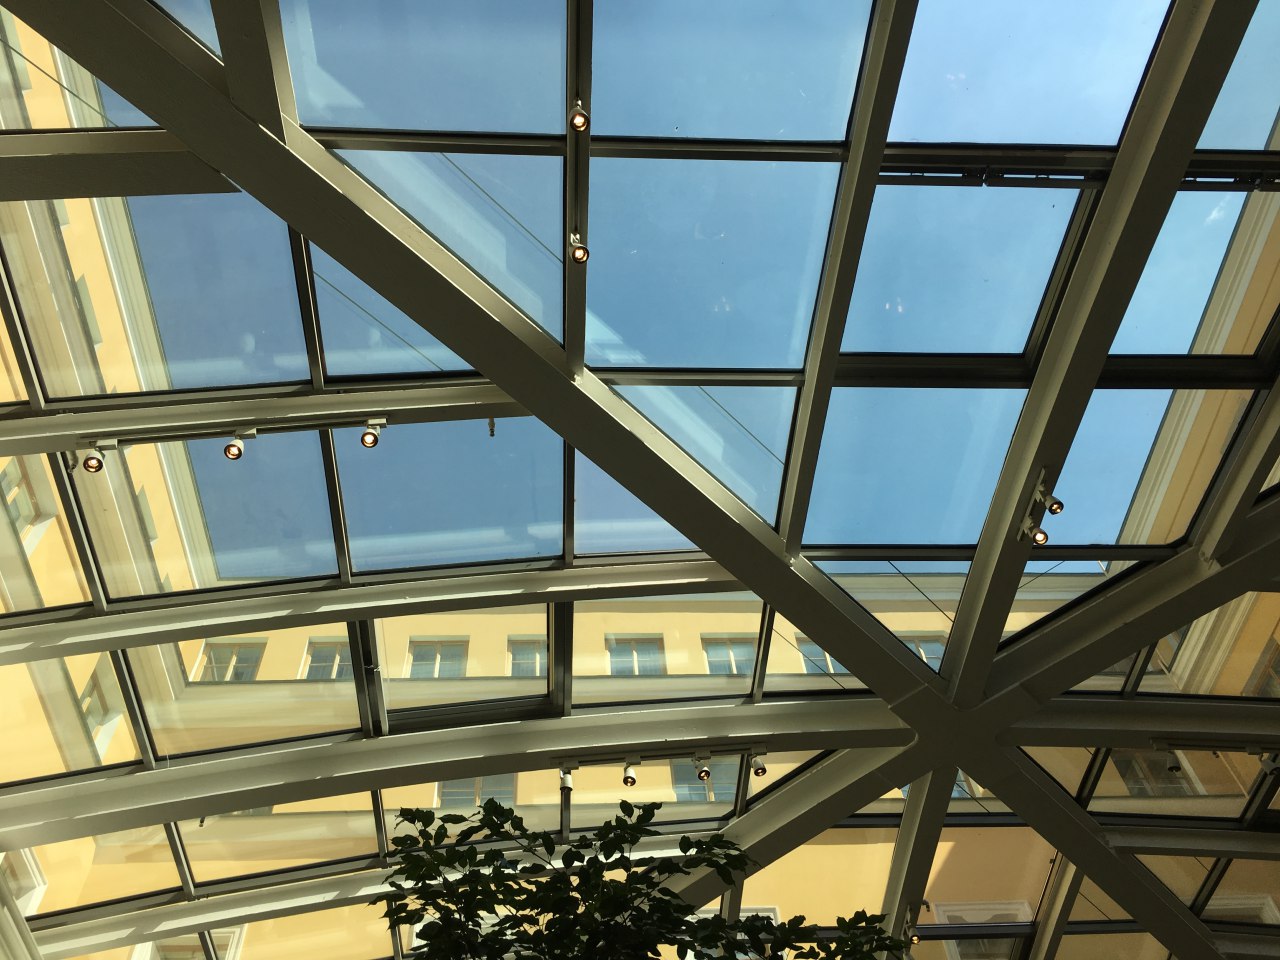 Guess the Hotel-Atrium Skylights